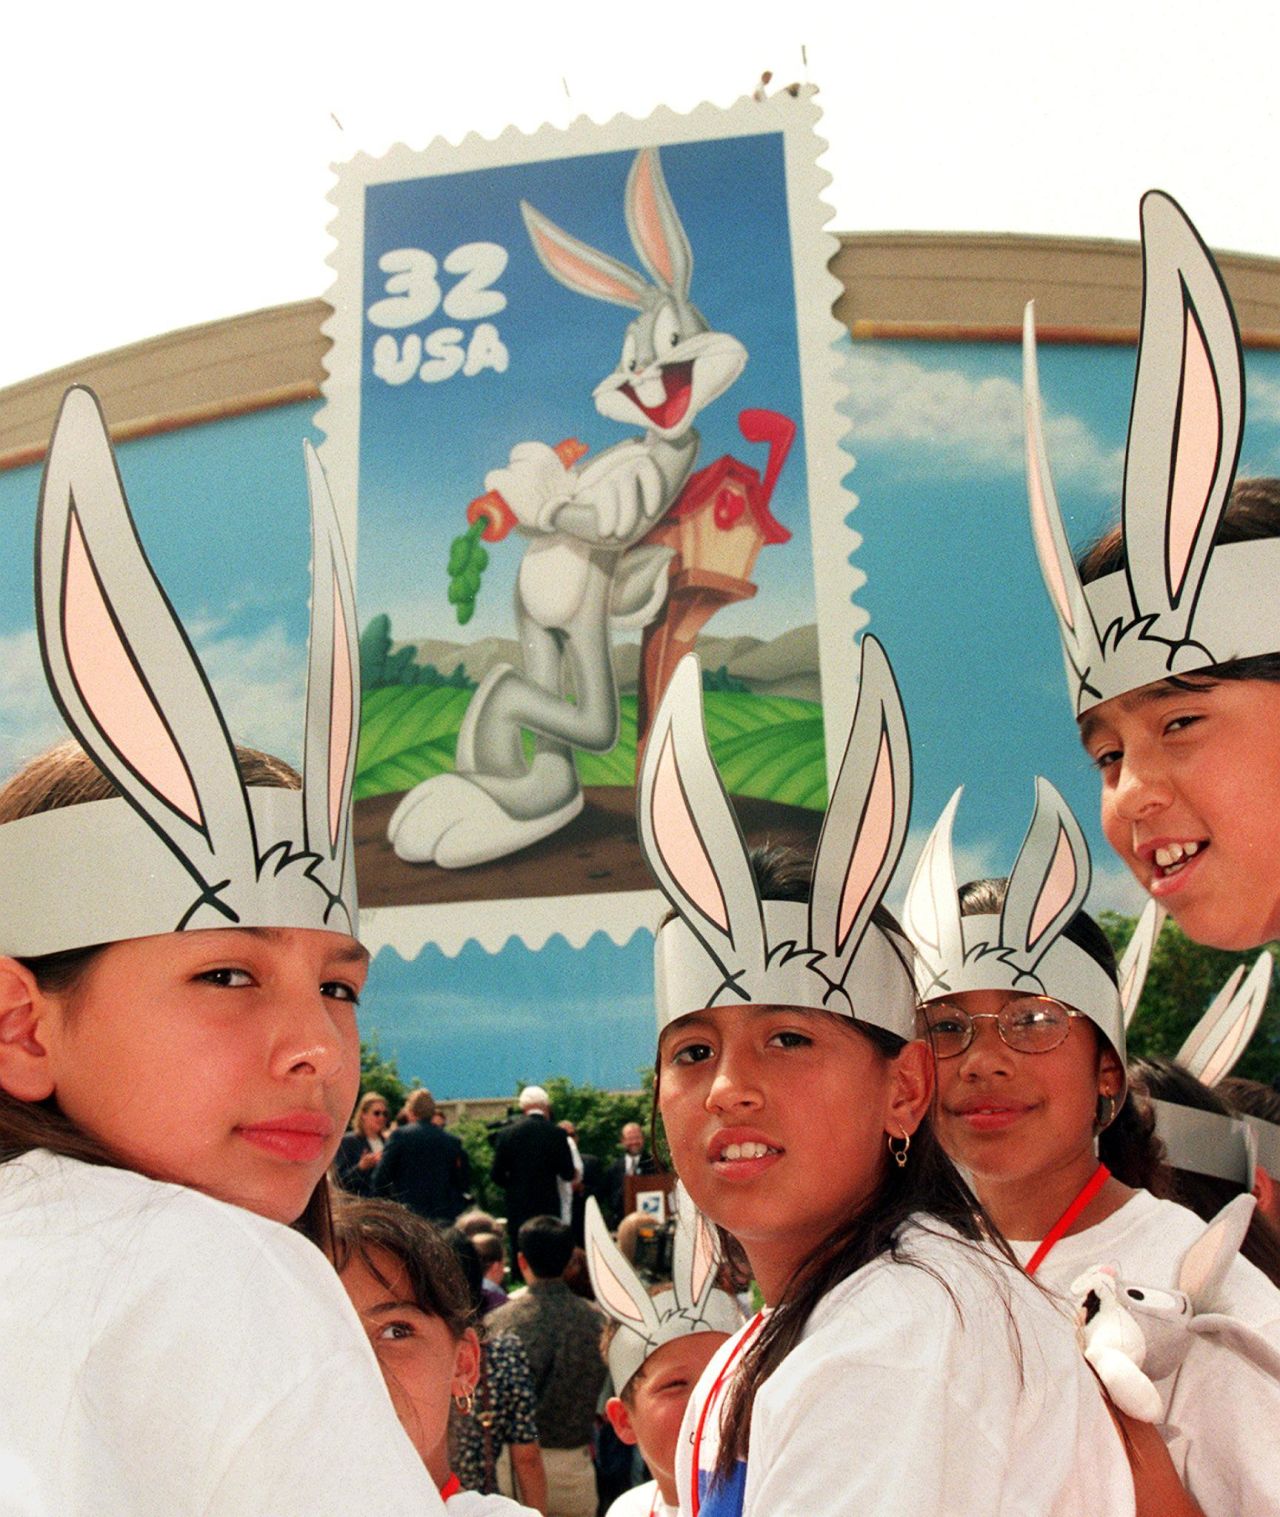 He's not a bug. He's a rabbit. But Bugs Bunny got his own stamp in 1997. Some stamp collectors gave the U.S. Postal Service an earful, saying they thought the famous cartoon character was undeserving of a stamp.